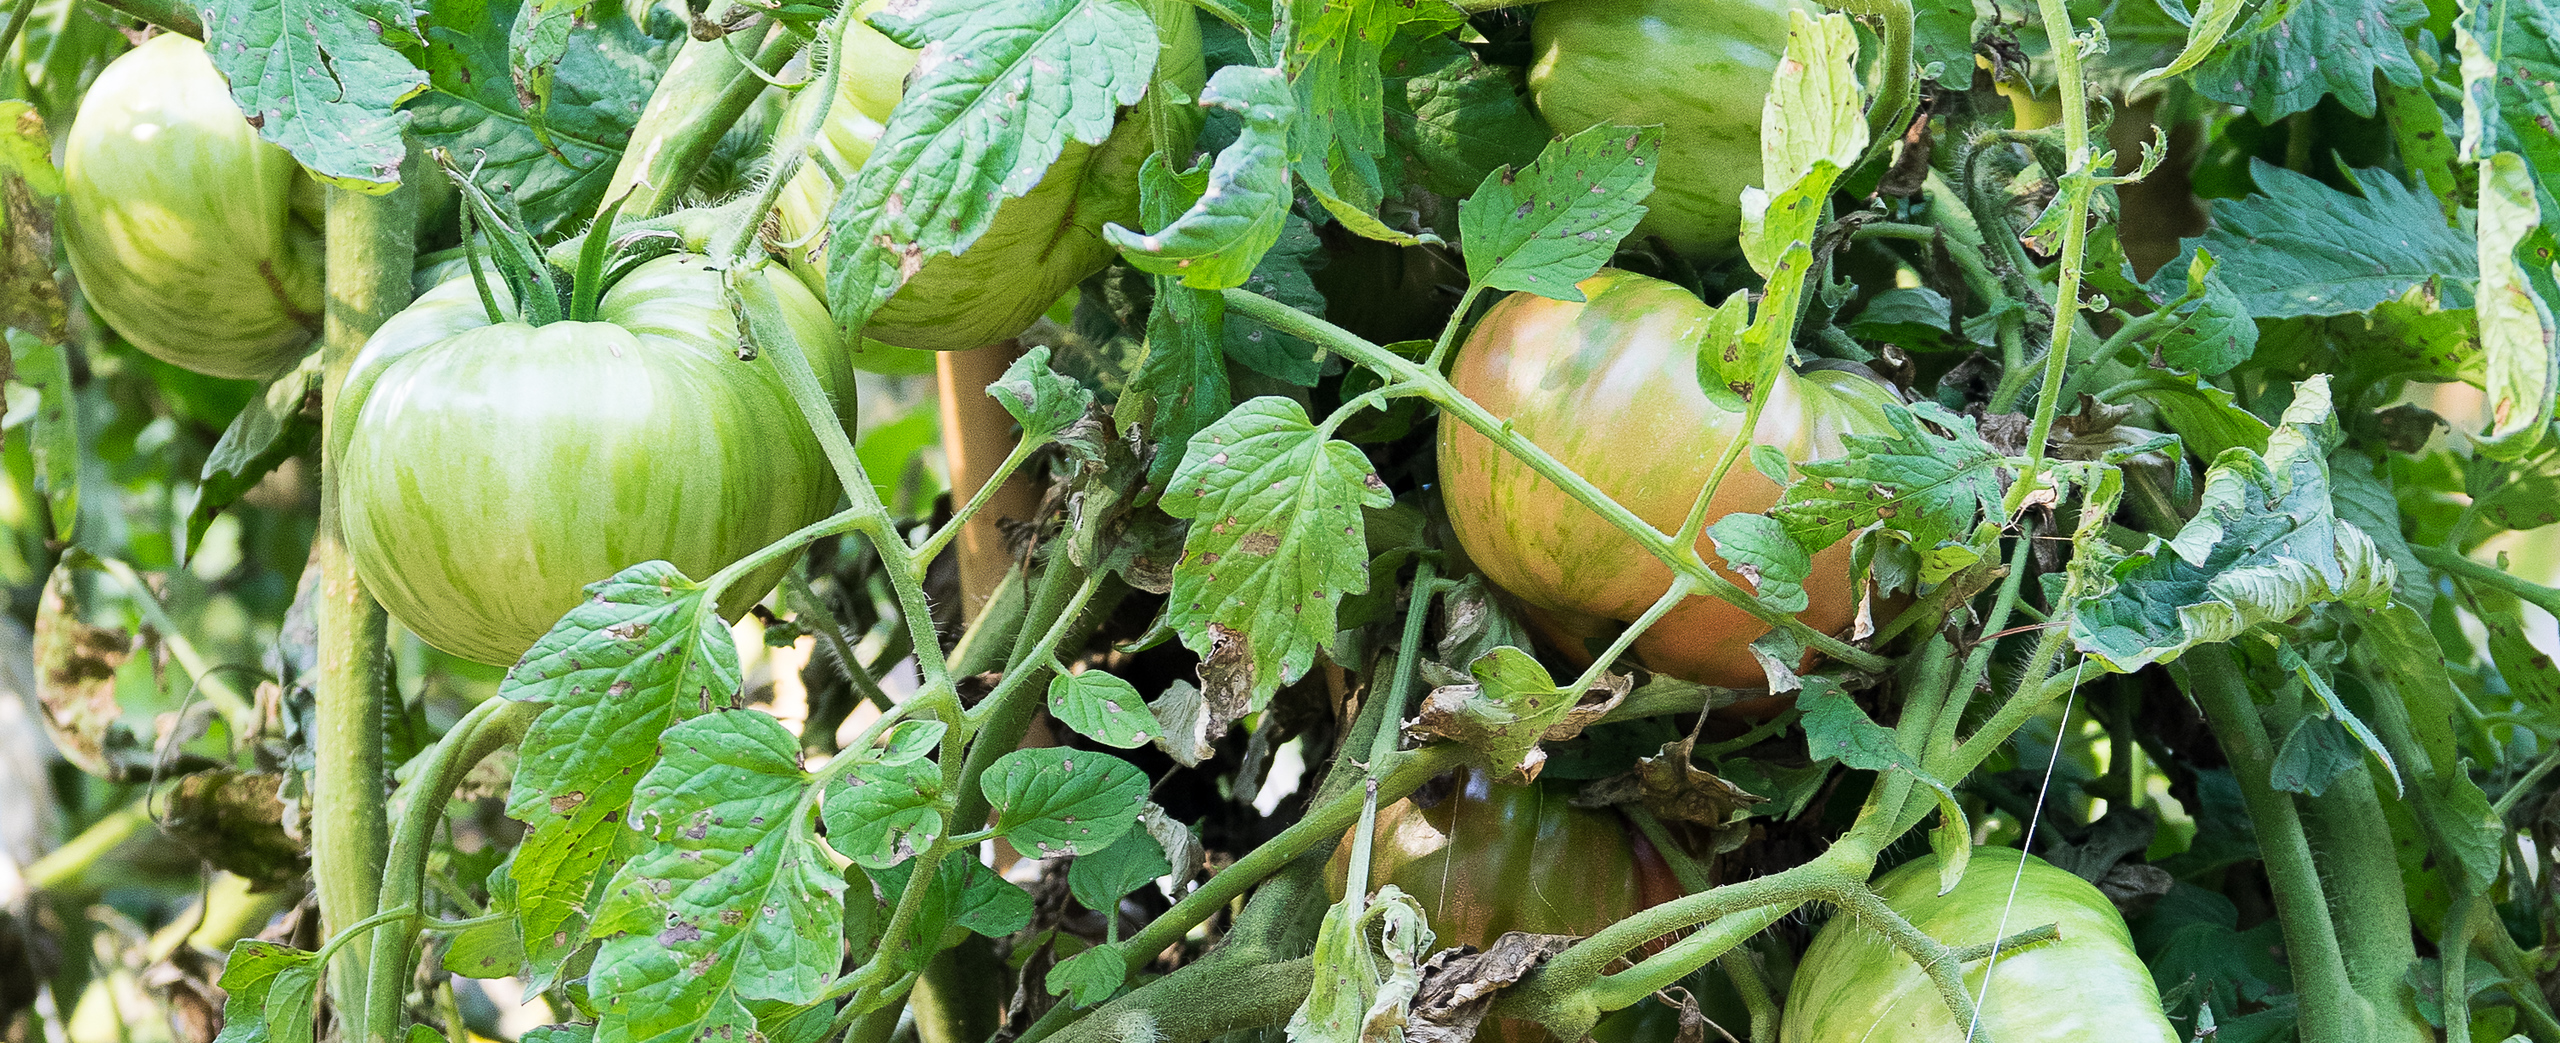 Large Tomatoes growing on vine